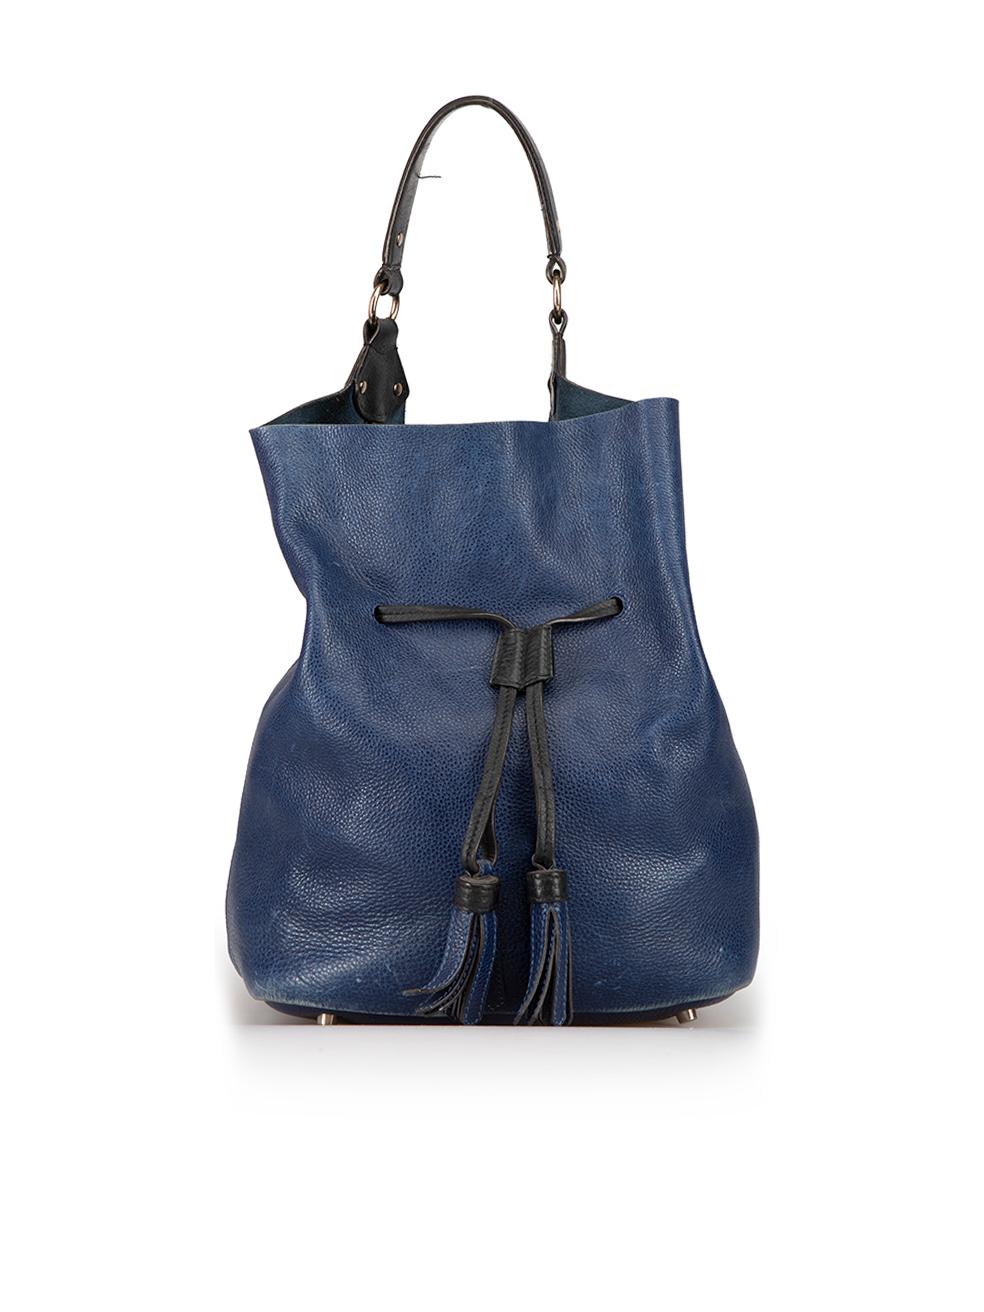 Burberry Blue Leather Bucket Bag In Good Condition For Sale In London, GB